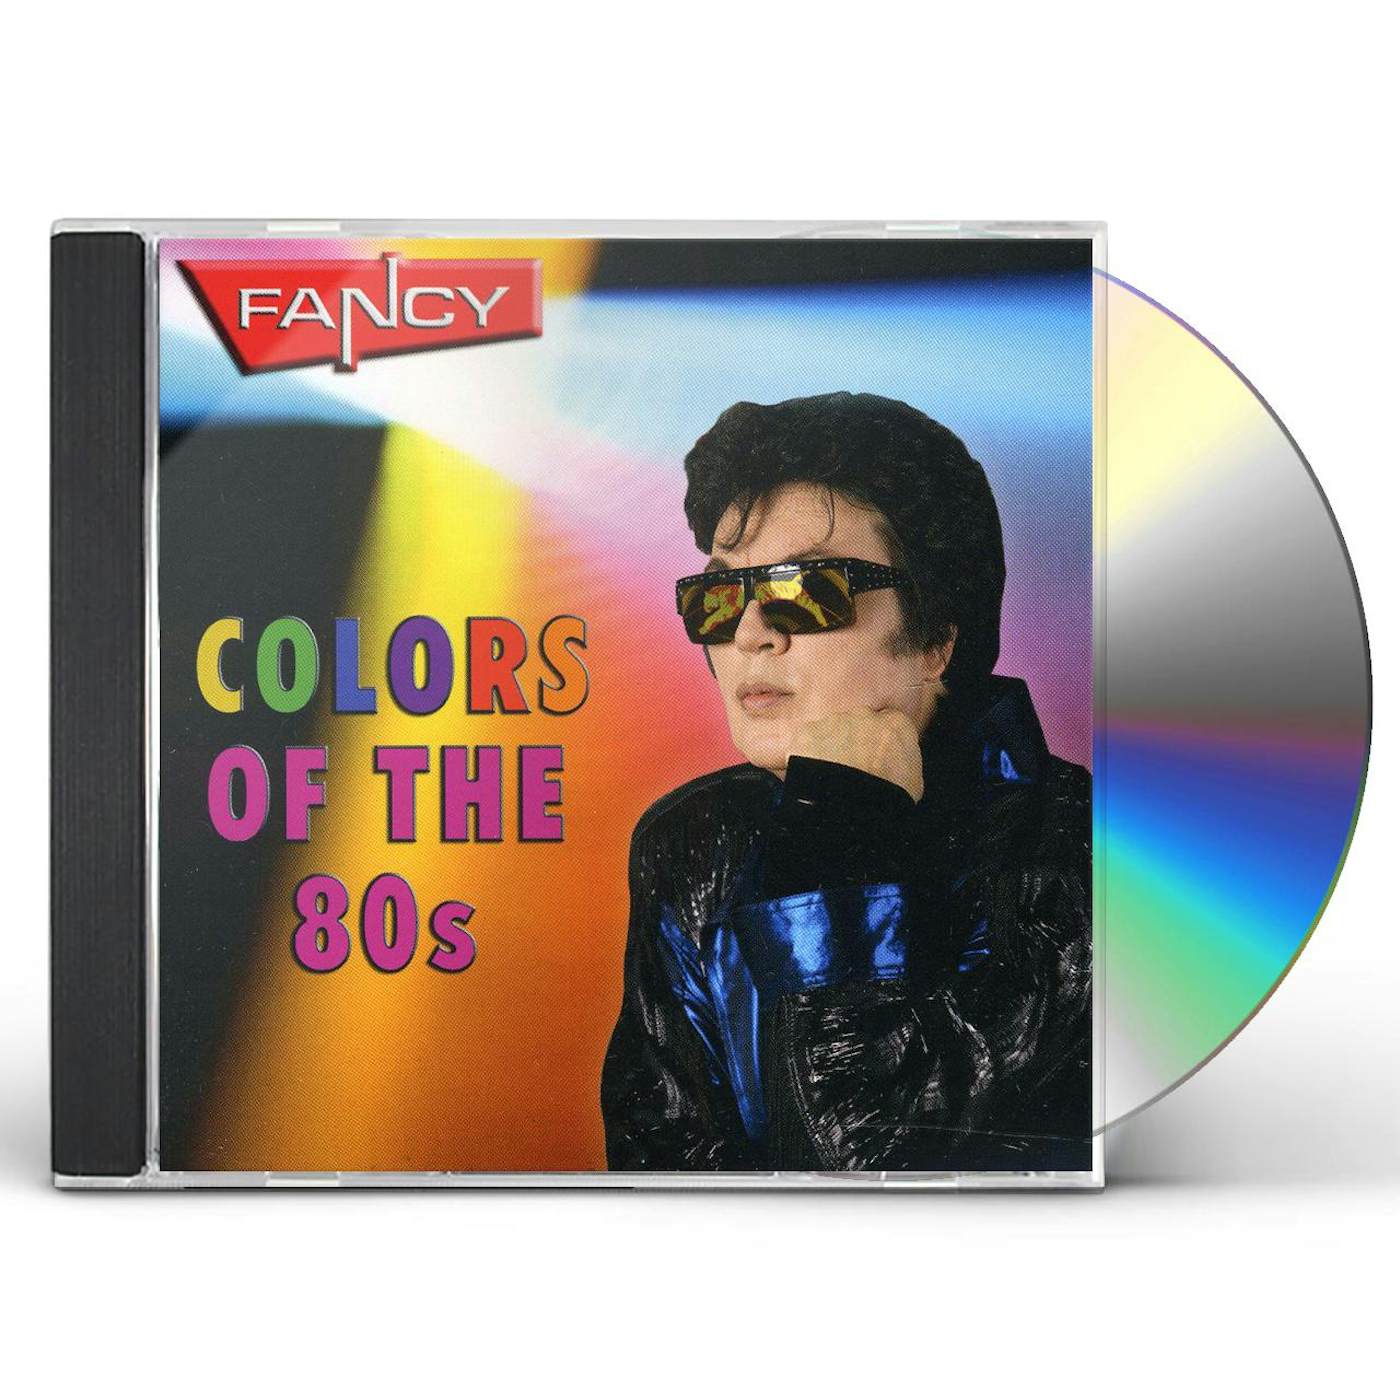 Fancy COLORS OF THE 80S CD